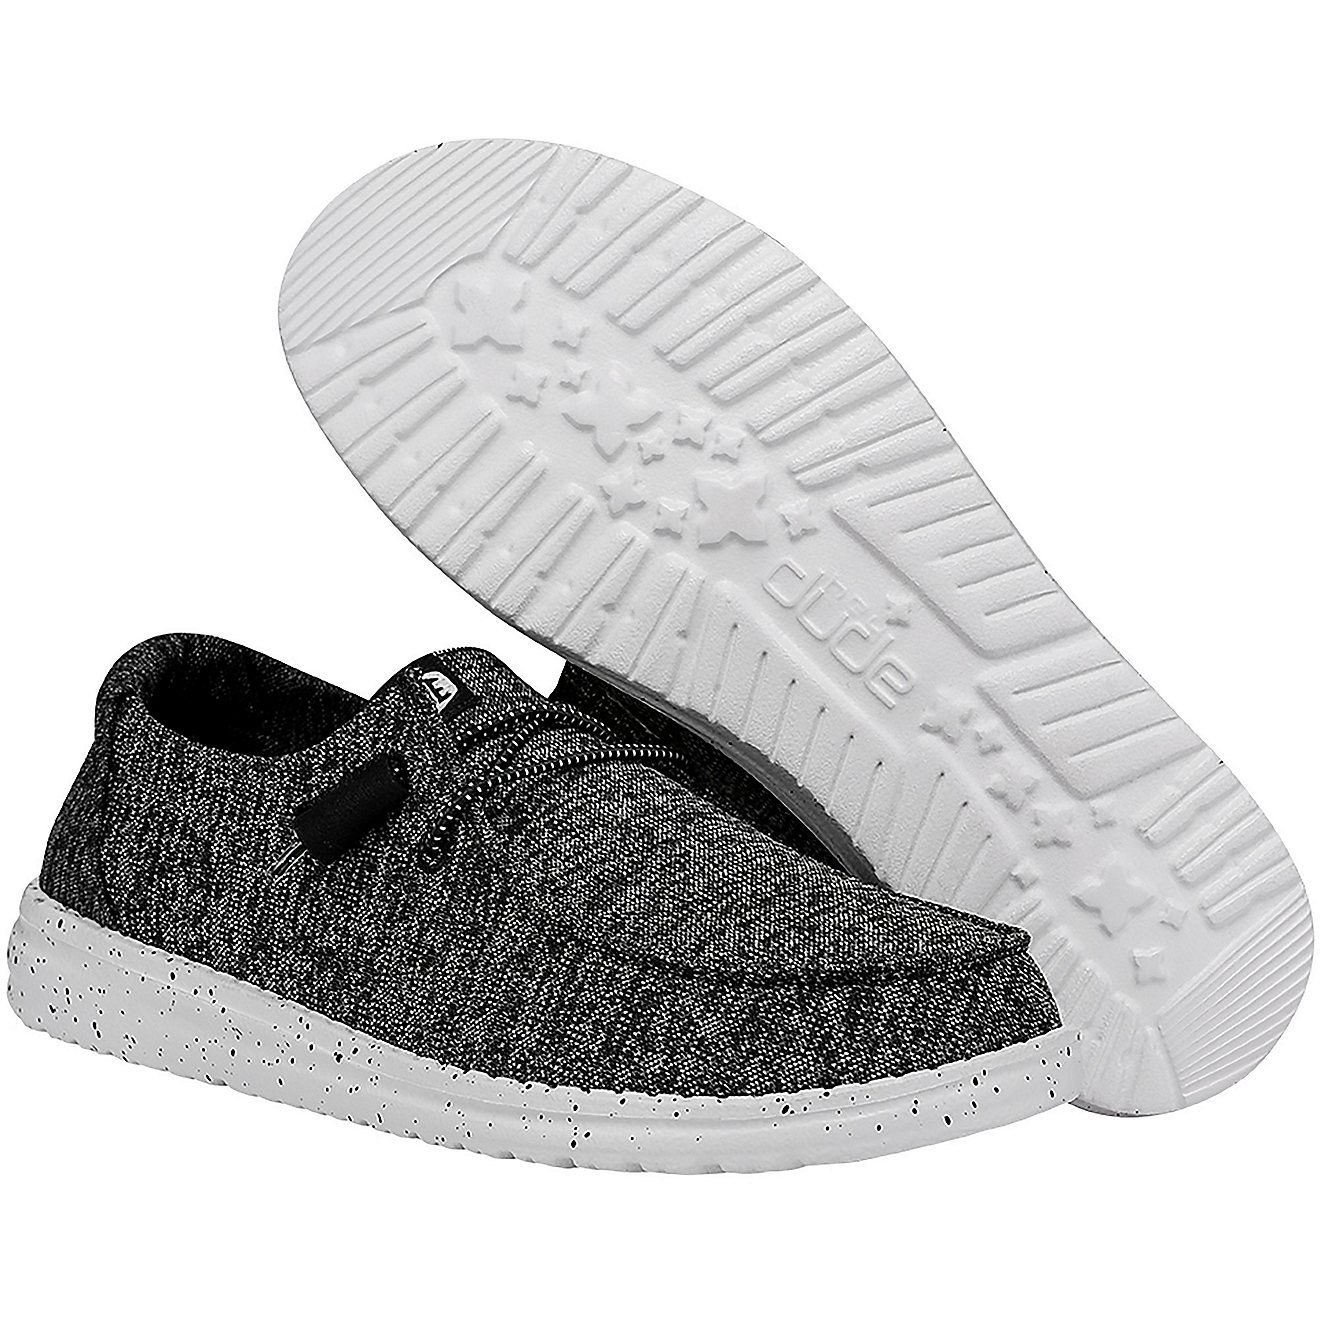 HEYDUDE Women’s Wendy Sport Knit Shoes                                                                                         - view number 6